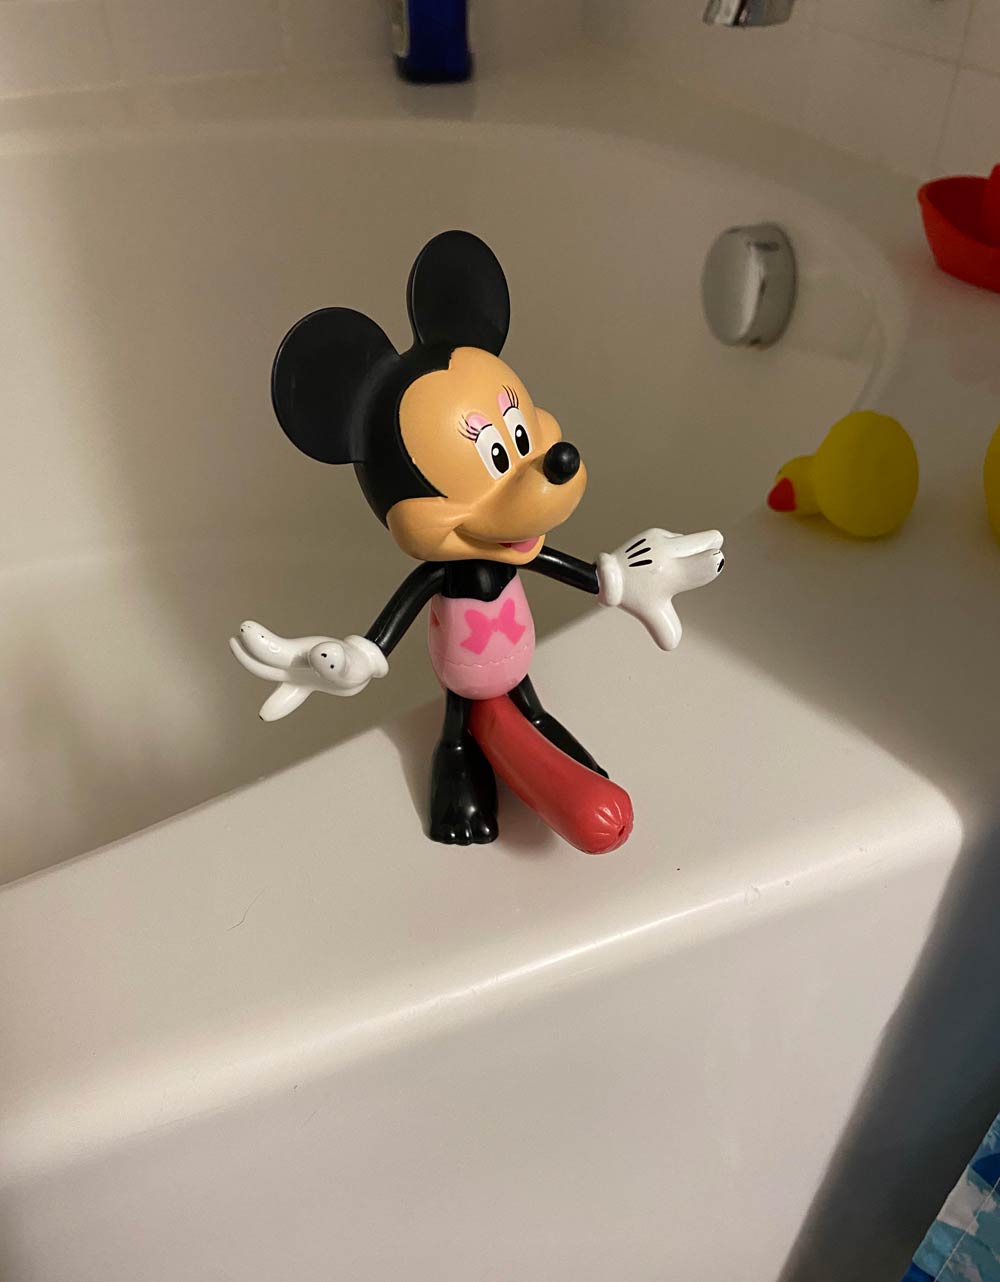 My daughter (4yo) said she had to give Minnie Mouse a floaty before she could get in the bath tonight. Boy was I not ready for this